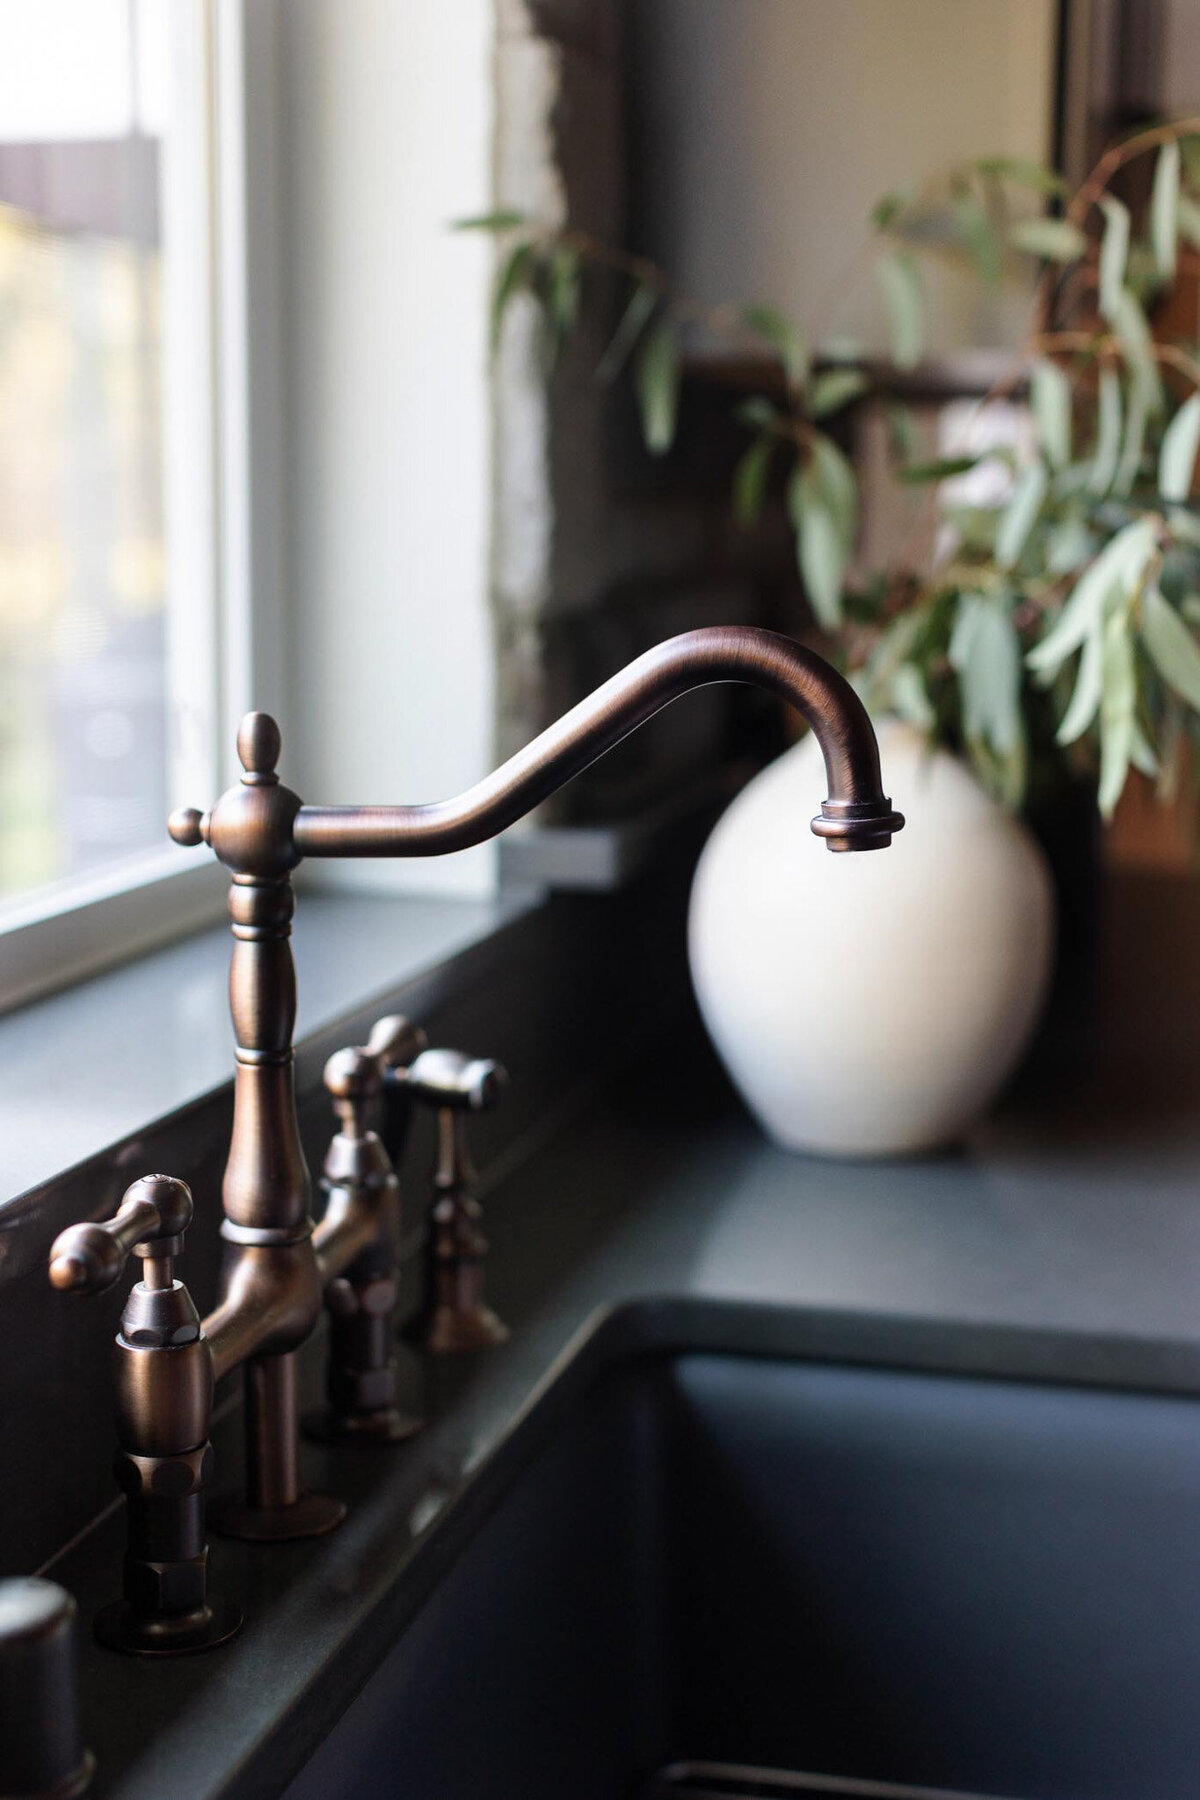 Dark grey kitchen sink with dark grey countertops, and antique bronze bridge faucet. Large beige vase with green florals next to the sink. Large window behind the sink. Antique bowl full of pears. Dish towel draped over the sink.